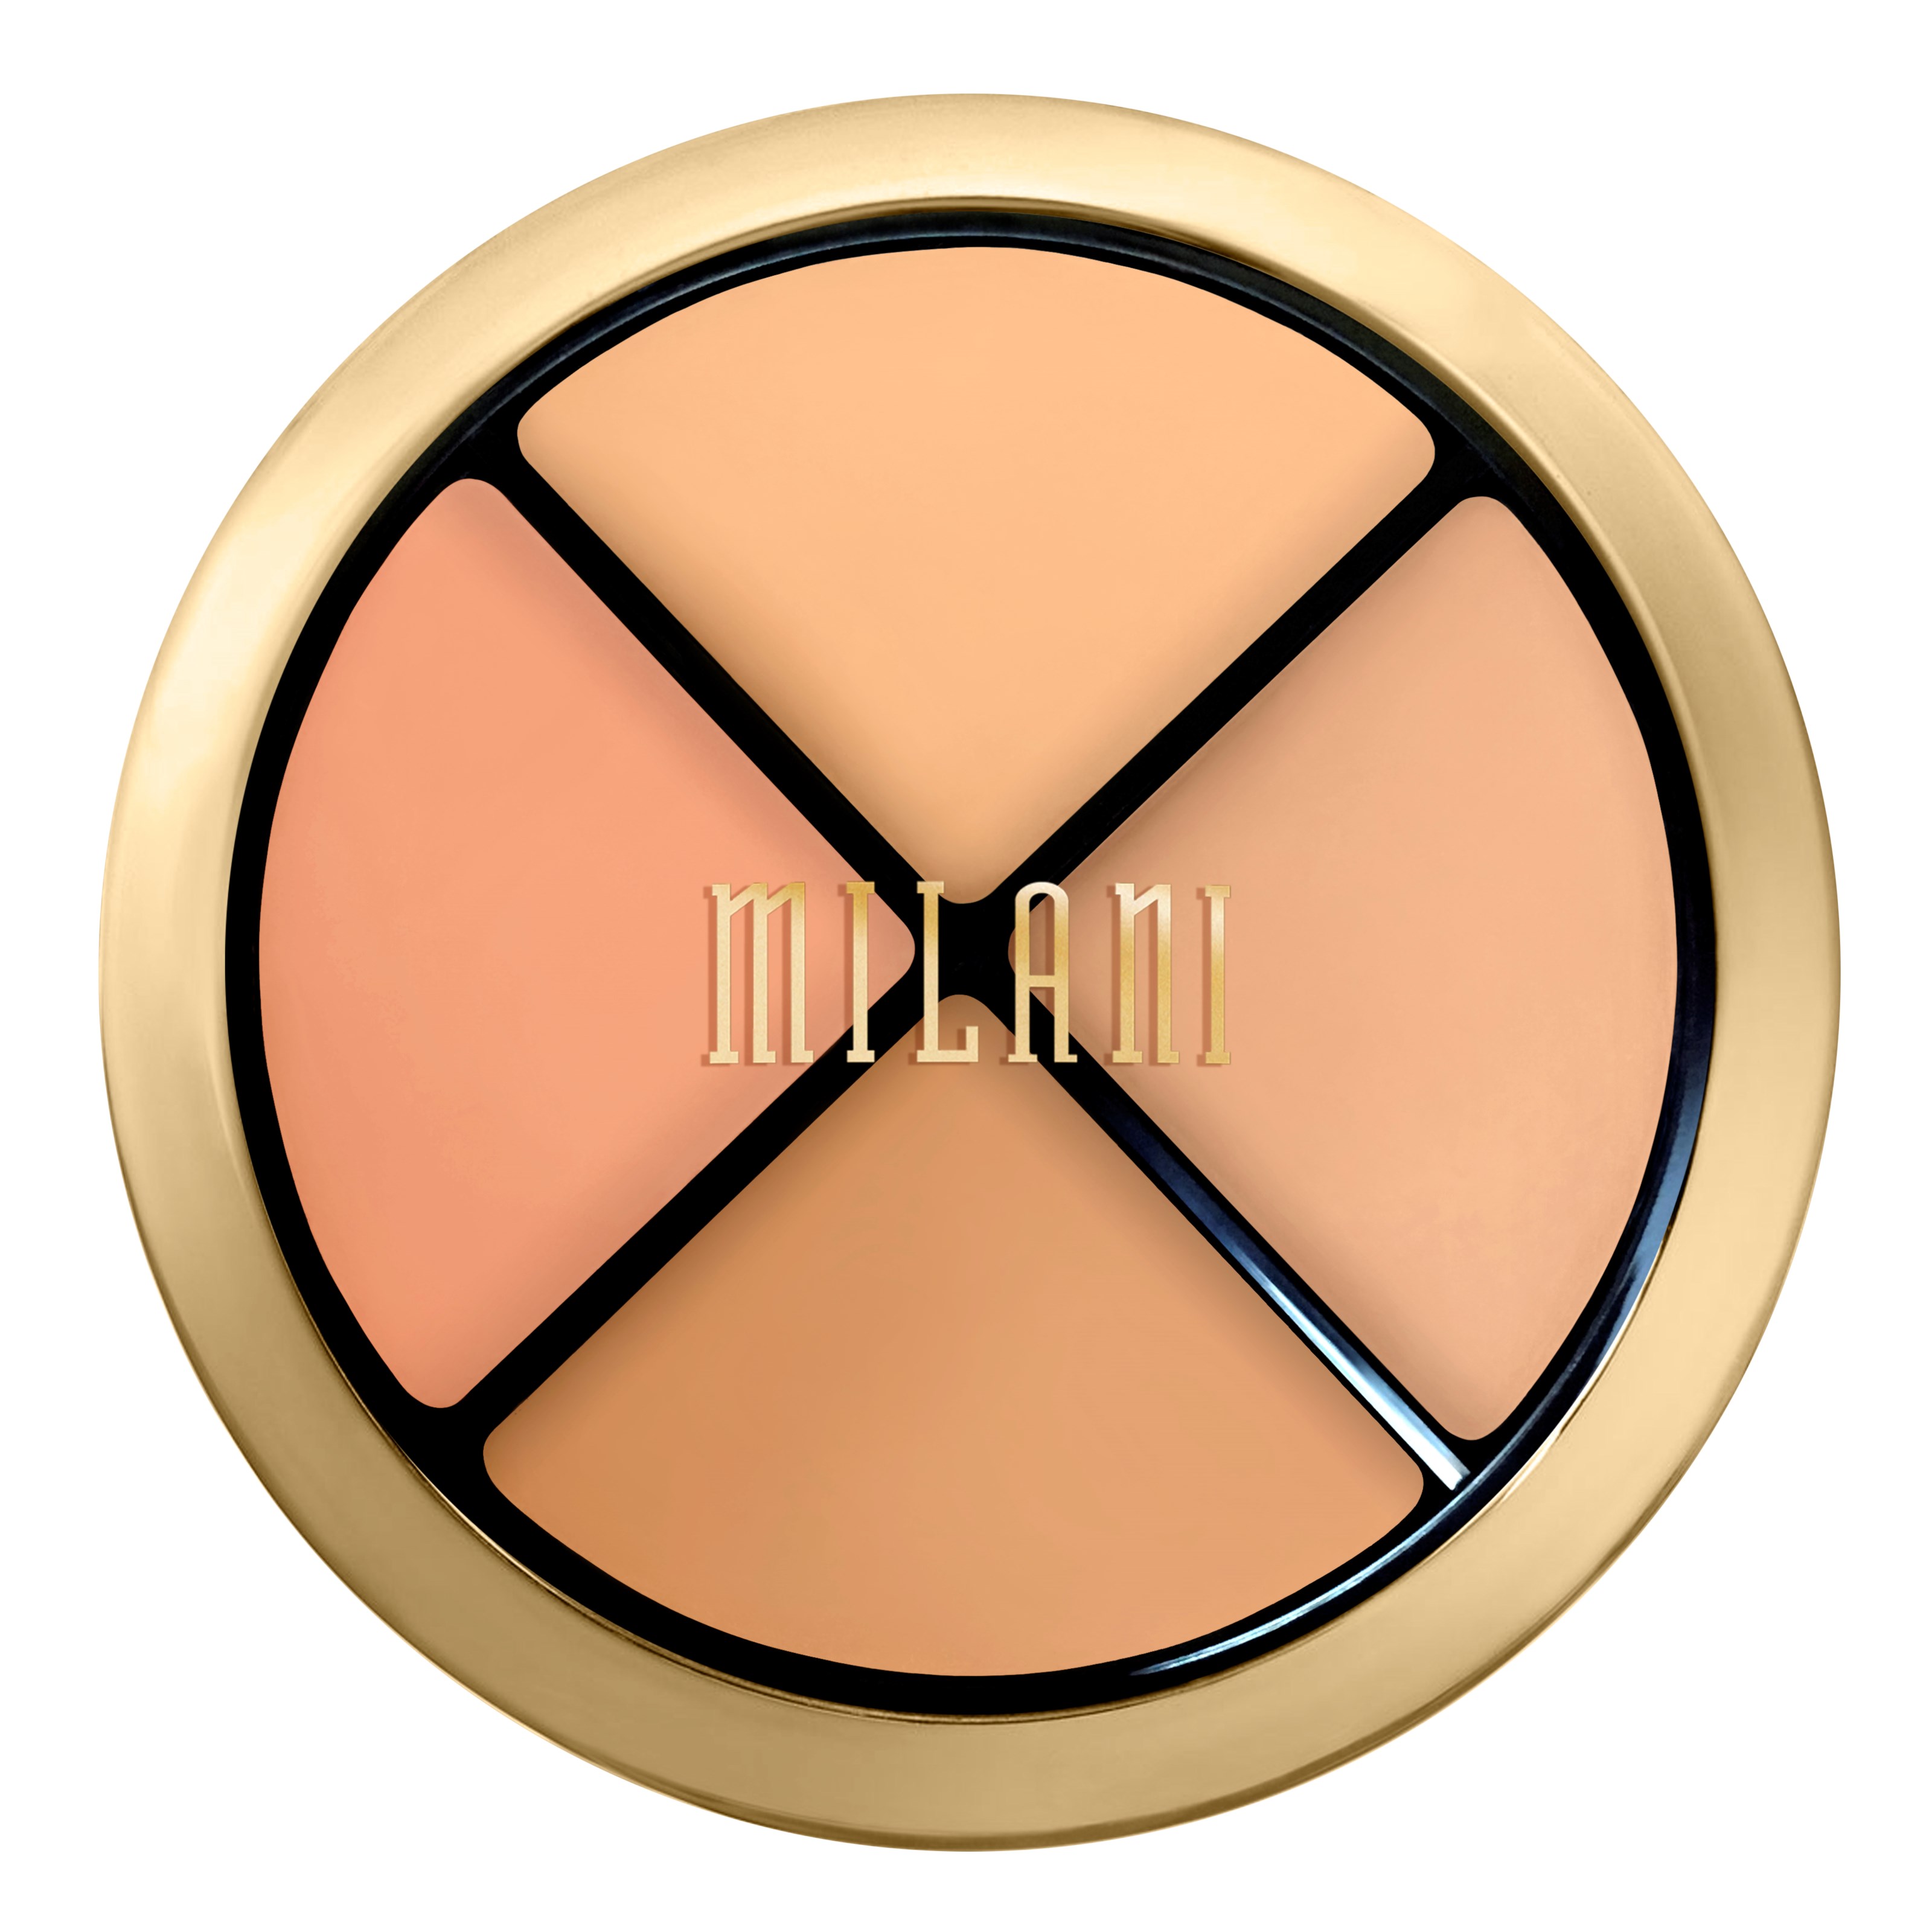 Milani Conceal + Perfect All In One Concealer Kit - 02 Light to Medium